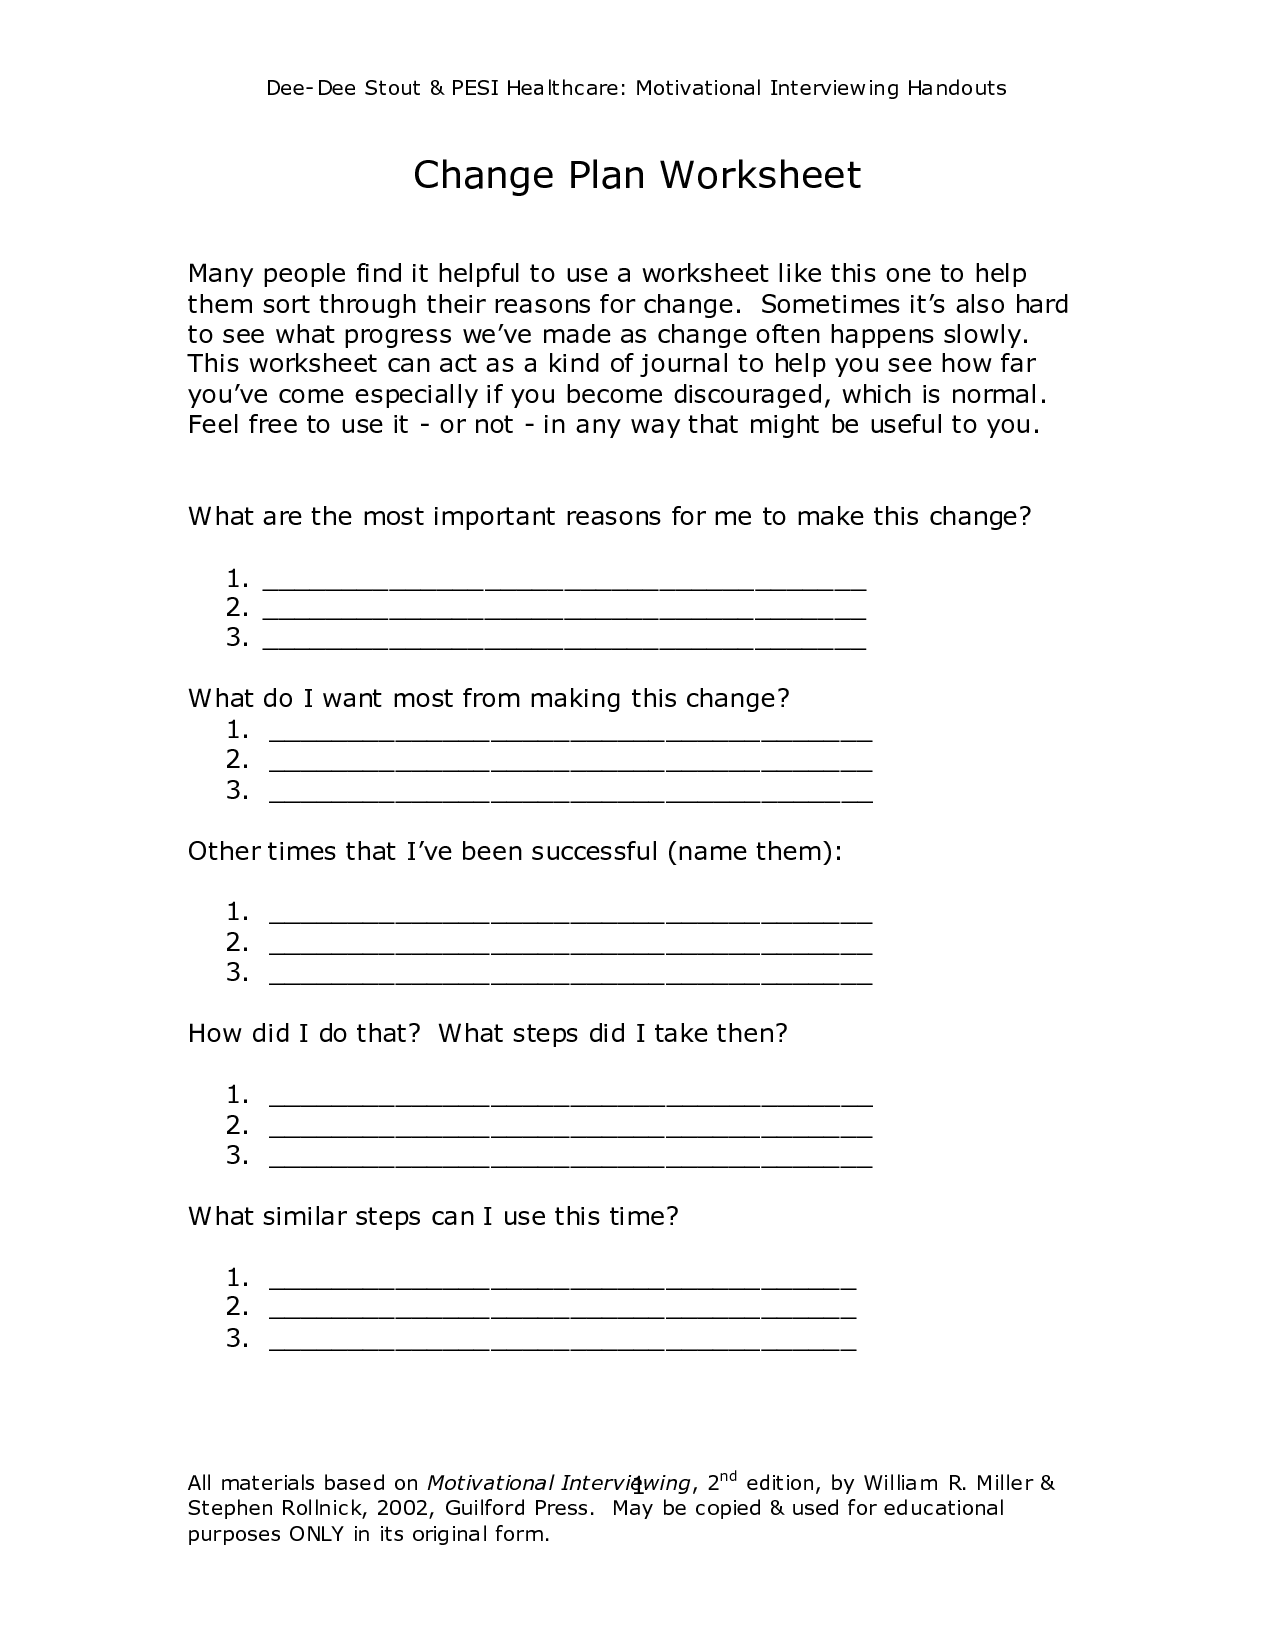 Motivational Interviewing Stages of Change Worksheet Image